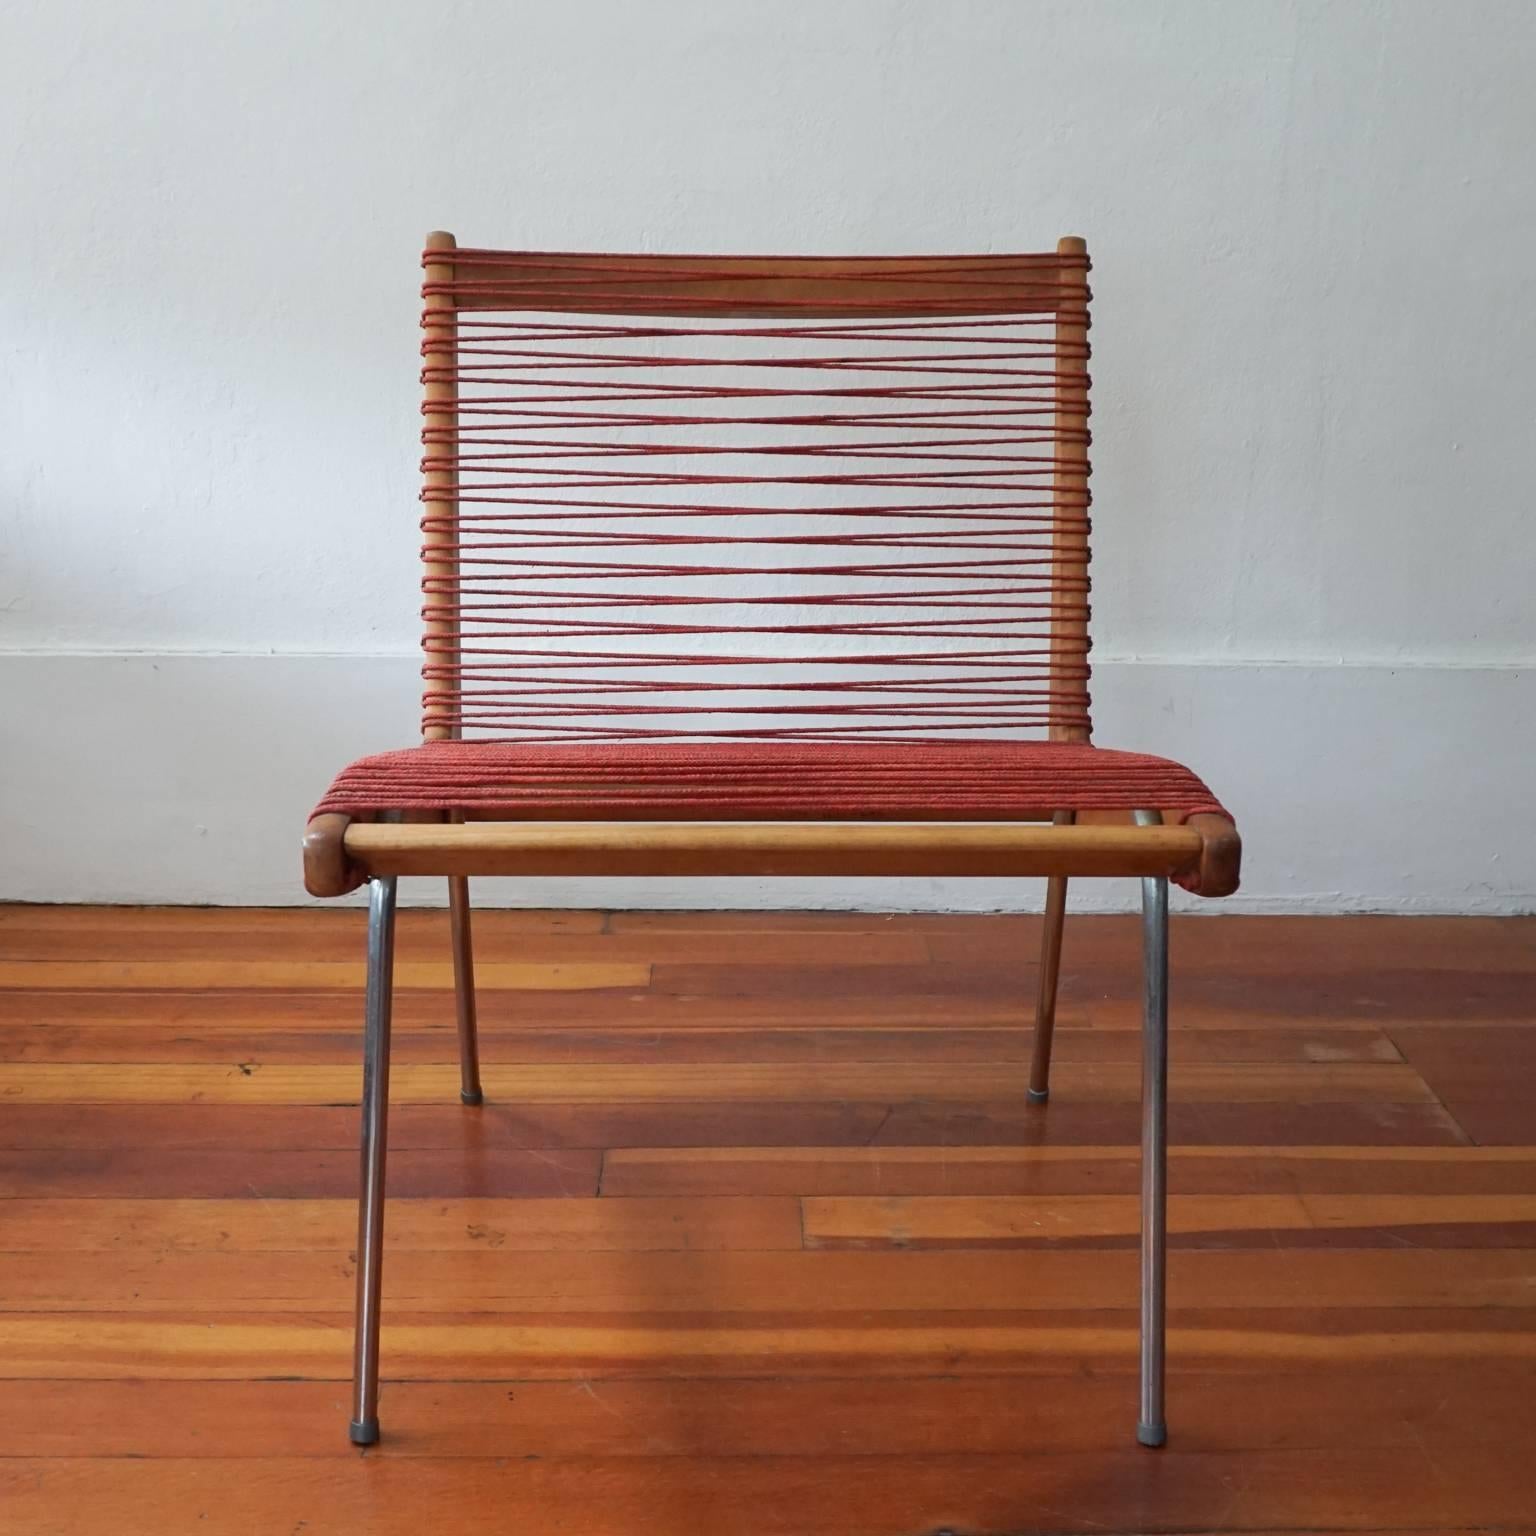 American String Chair by Robert J Ellenberger for Calfab Good Design, 1950s For Sale